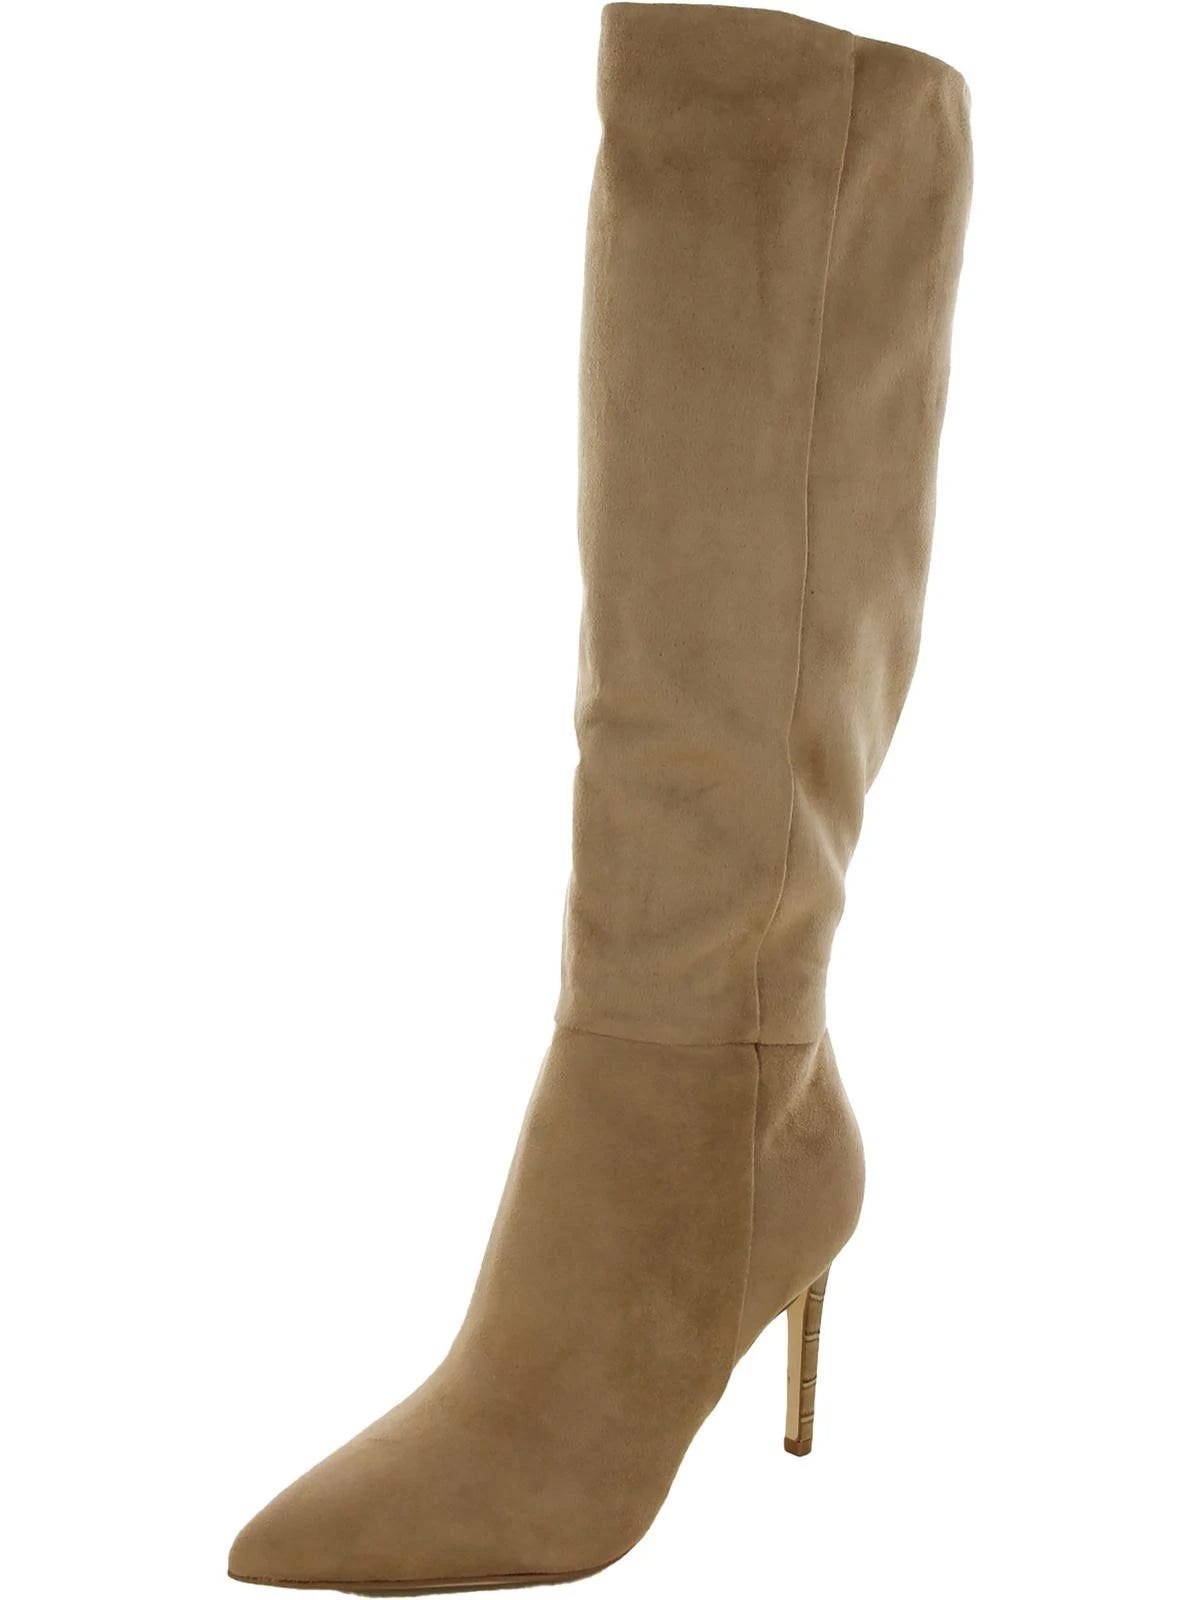 Richy Pointed Toe Knee-High Stiletto Boots | Image